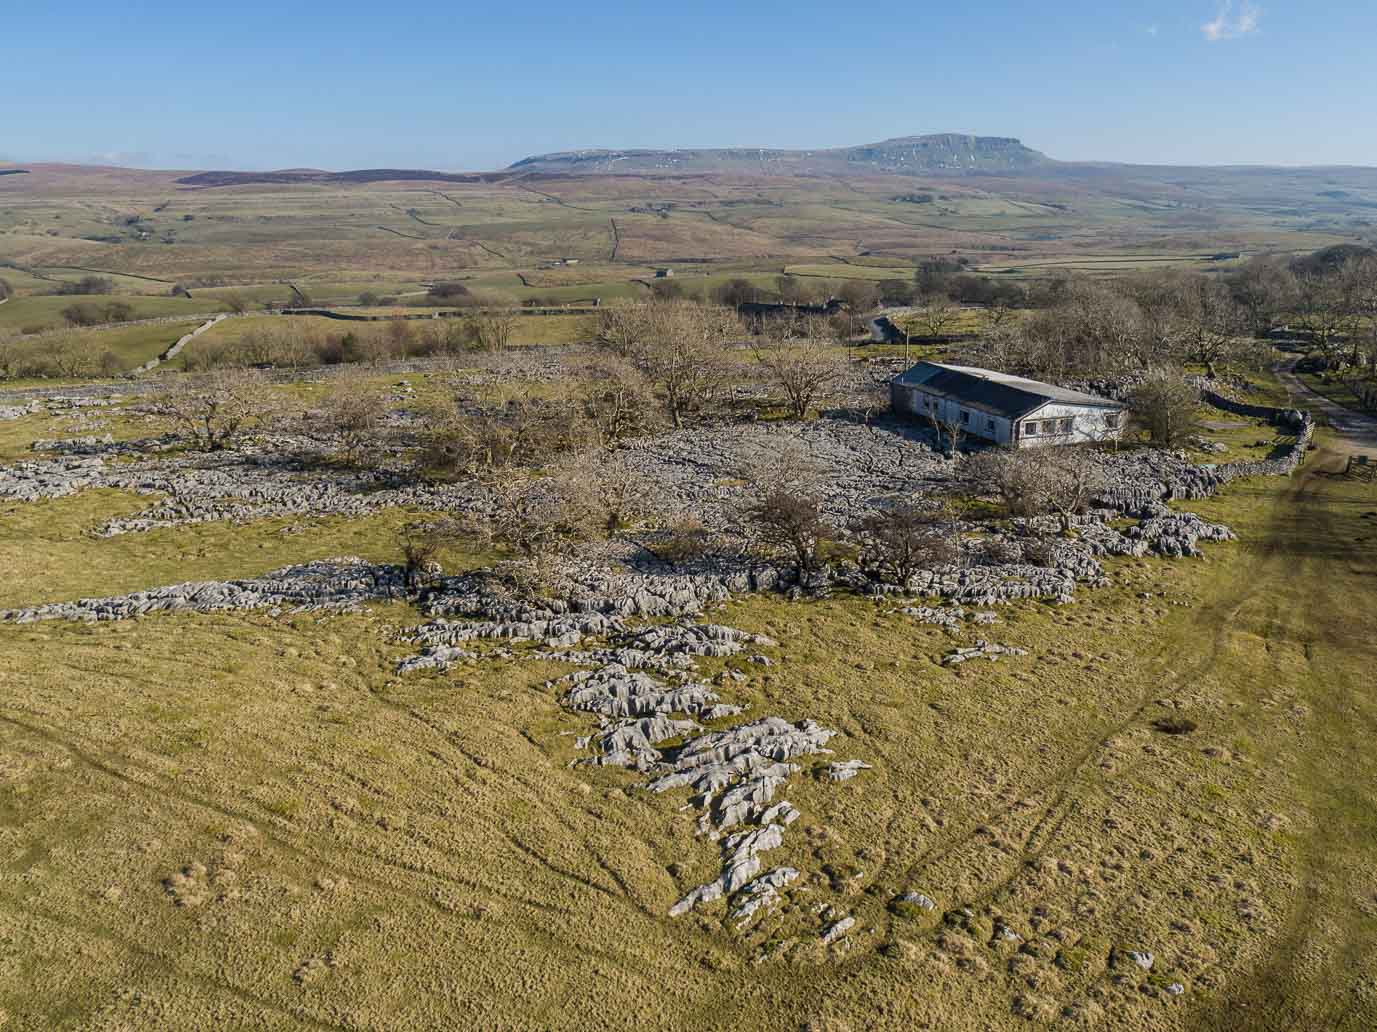 Aerial photography - The University of Leeds' Selside Outdoor Centre overlooking Pen-y-ghent, North Yorkshire - Midi Photography